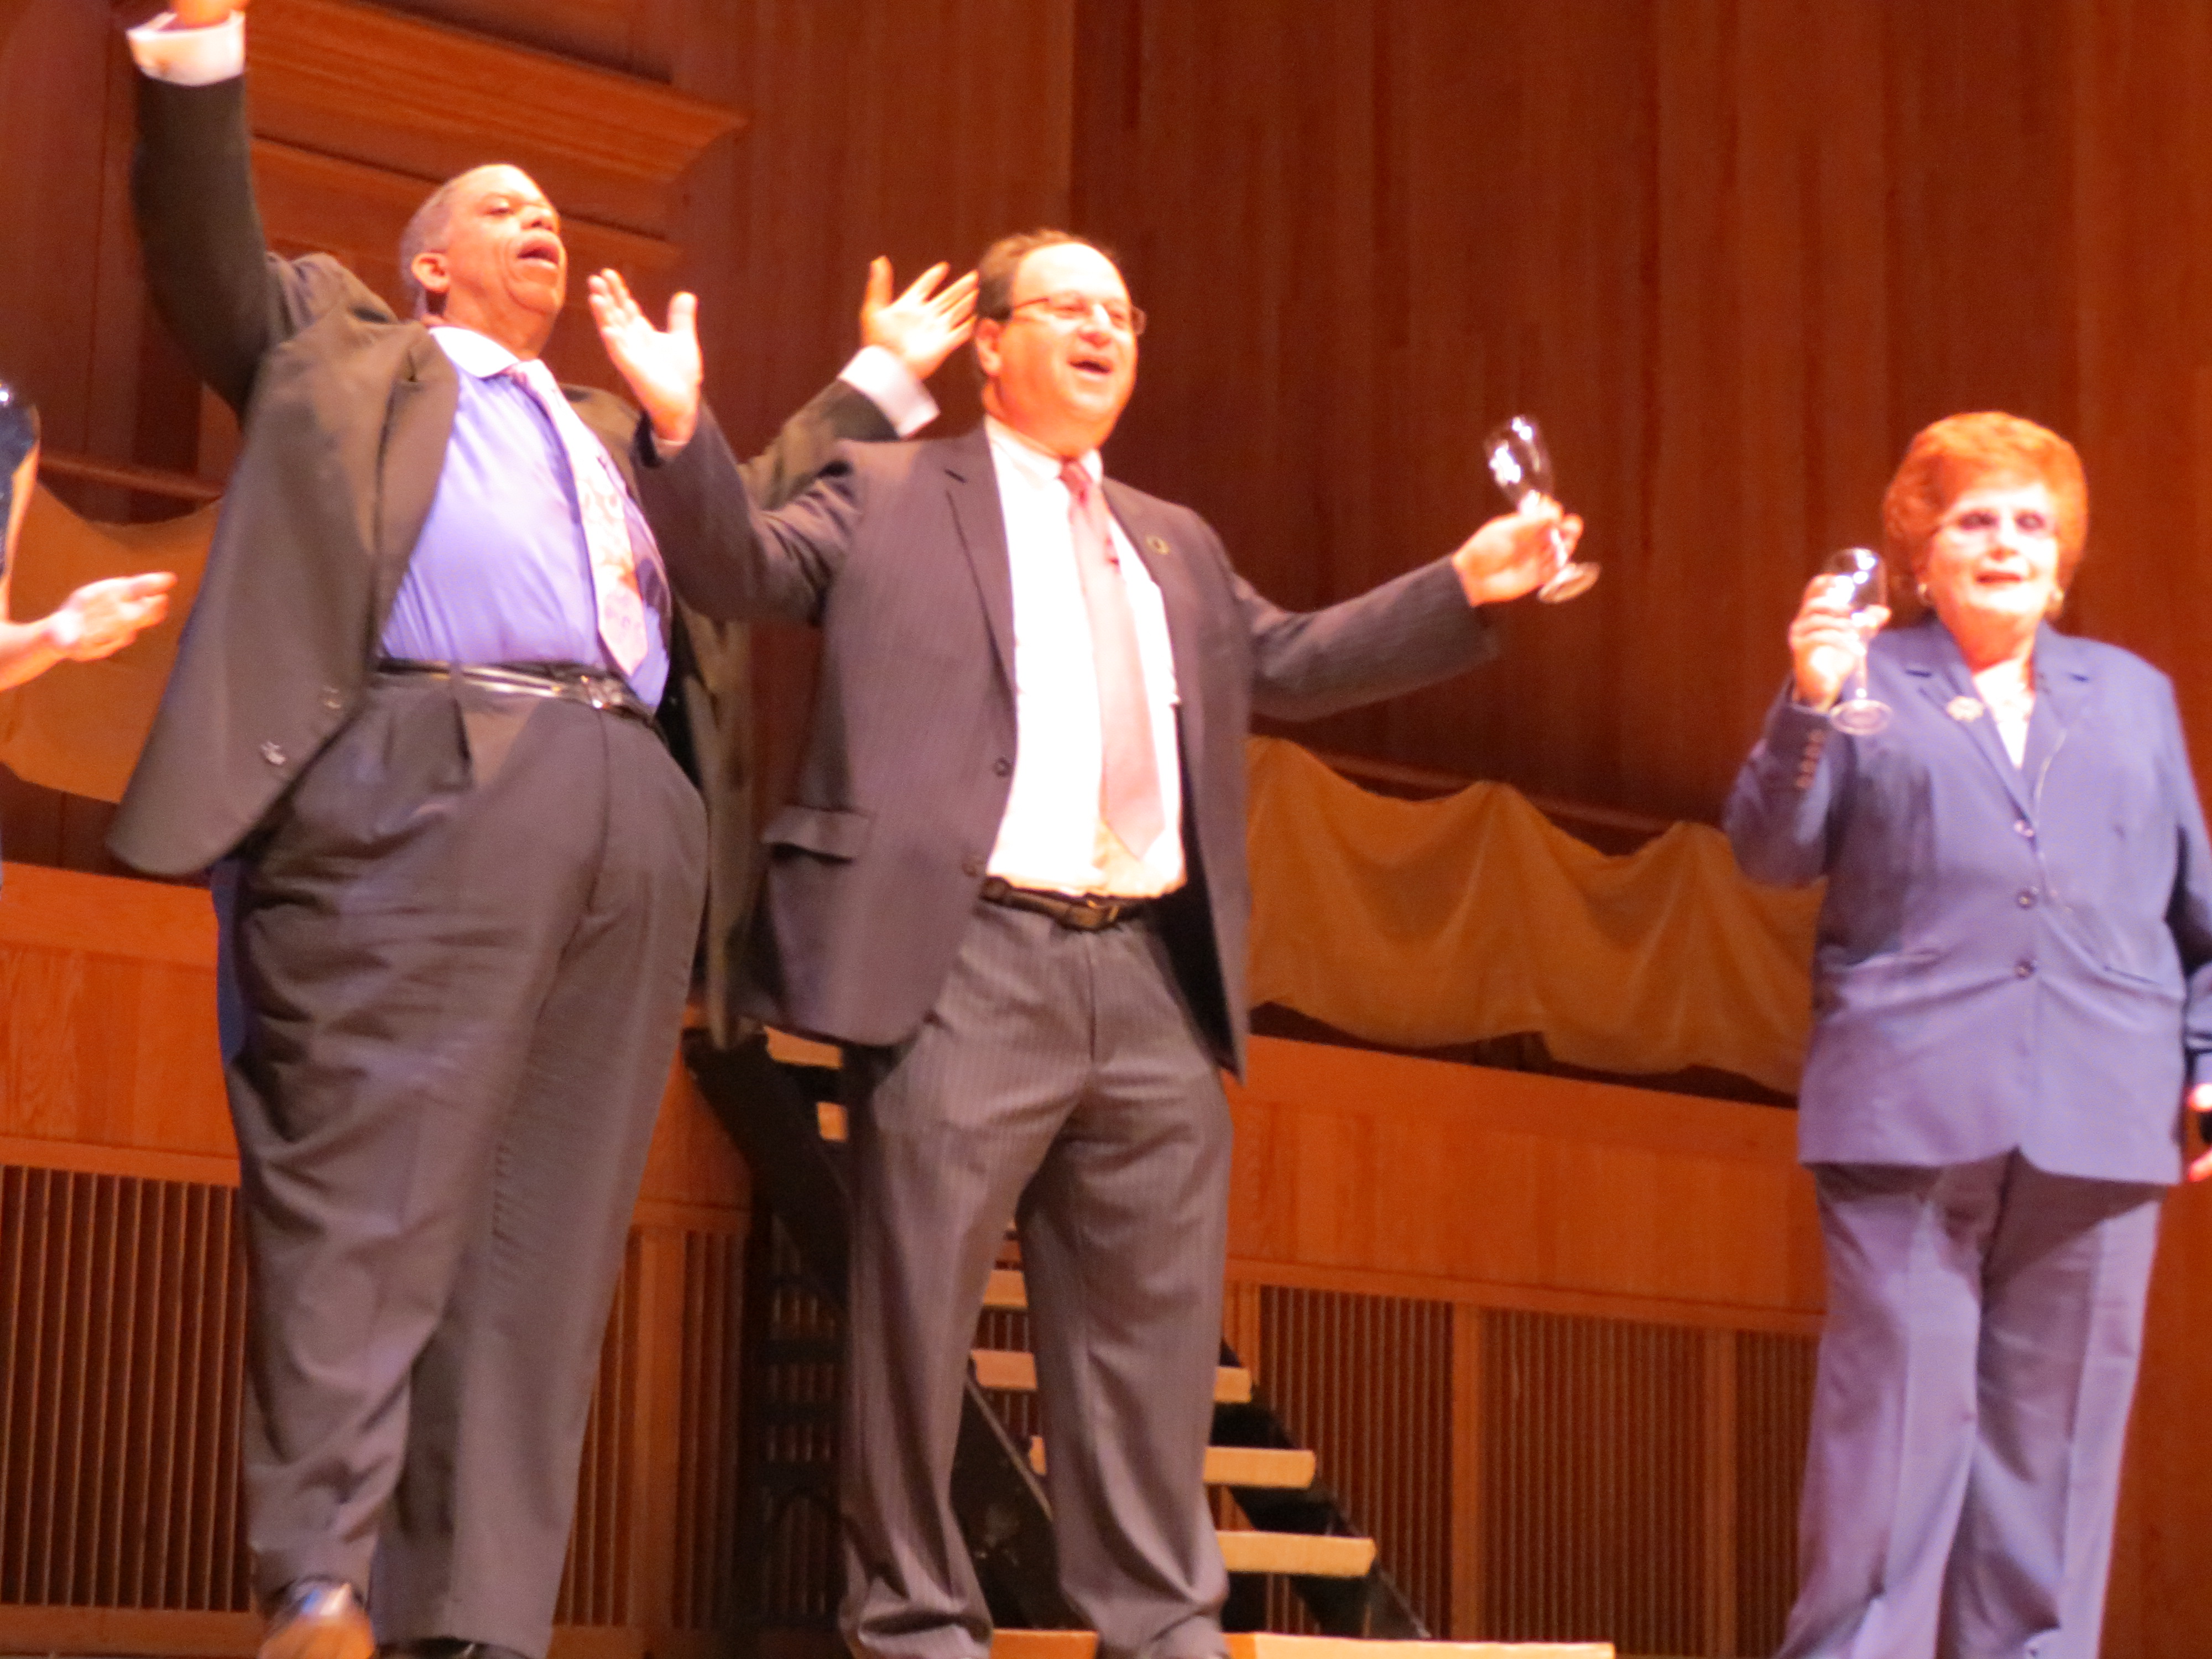 Councilman Leroy Comrie, left, Deputy Borough President Barry Grodenchik, and Councilwoman Karen Koslowitz landed laughs lamenting term limits in "Those Were the Days."